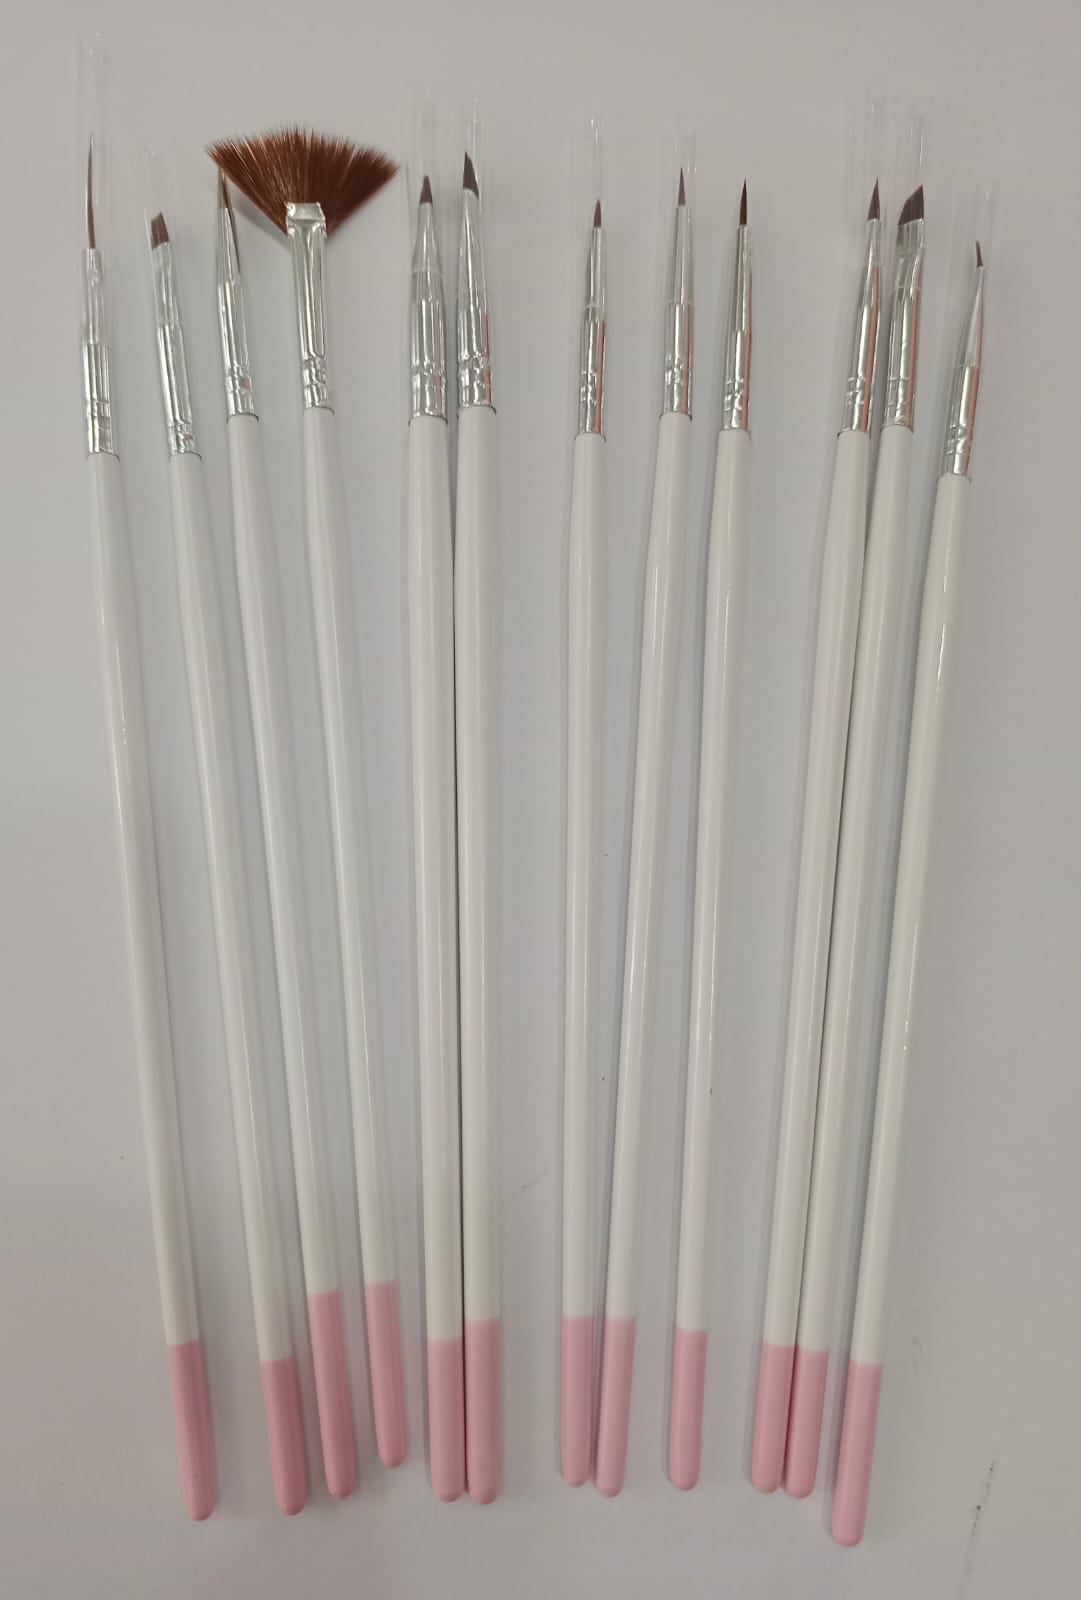 Buy Best 5pc/Set of Acrylic Nail Art Brushes in India | ILMP